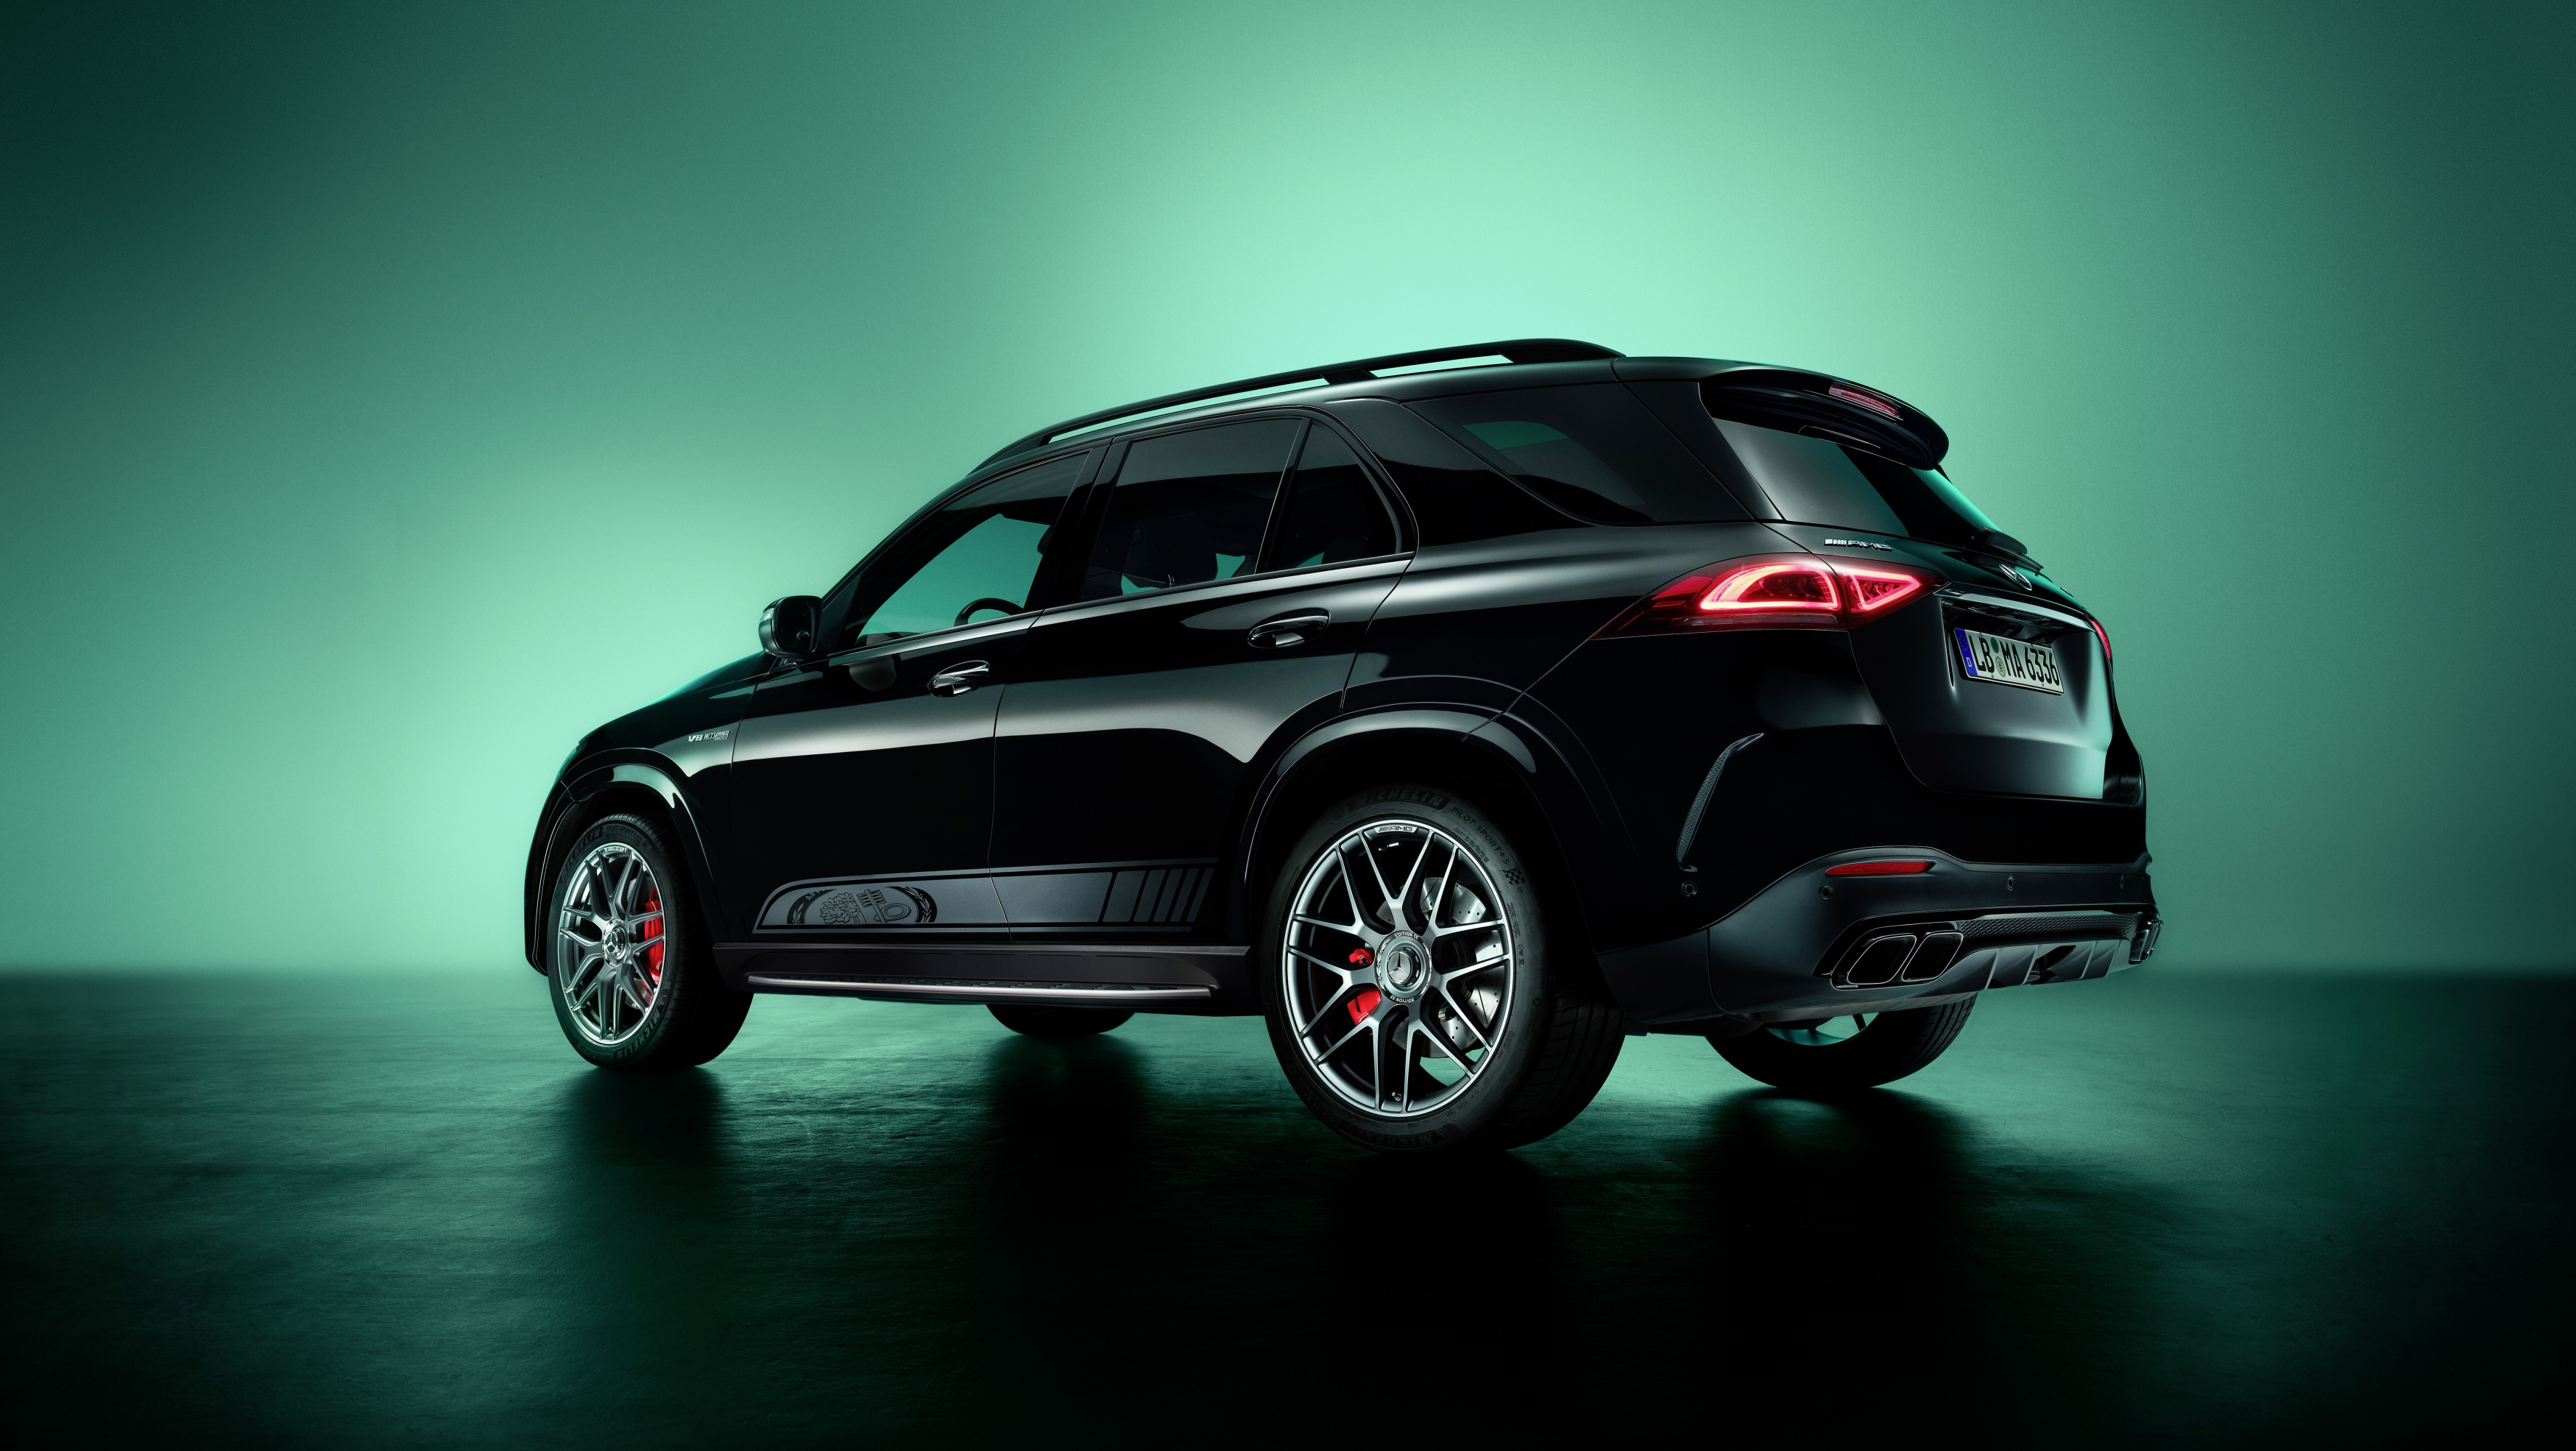 This new Mercedes-AMG GLE Edition 55 celebrates brand's 55th